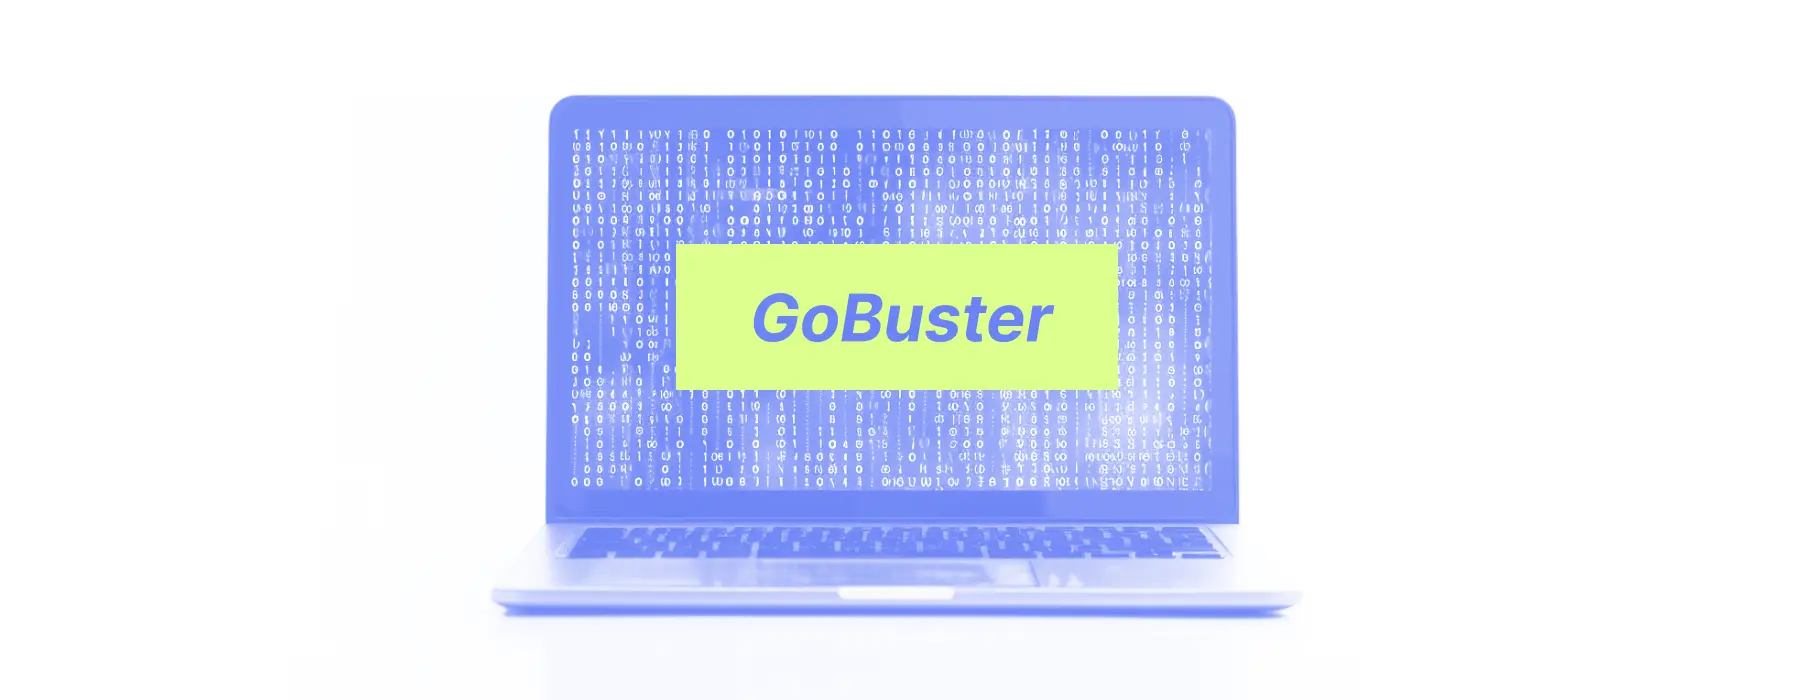 How to Use GoBuster for OSINT?